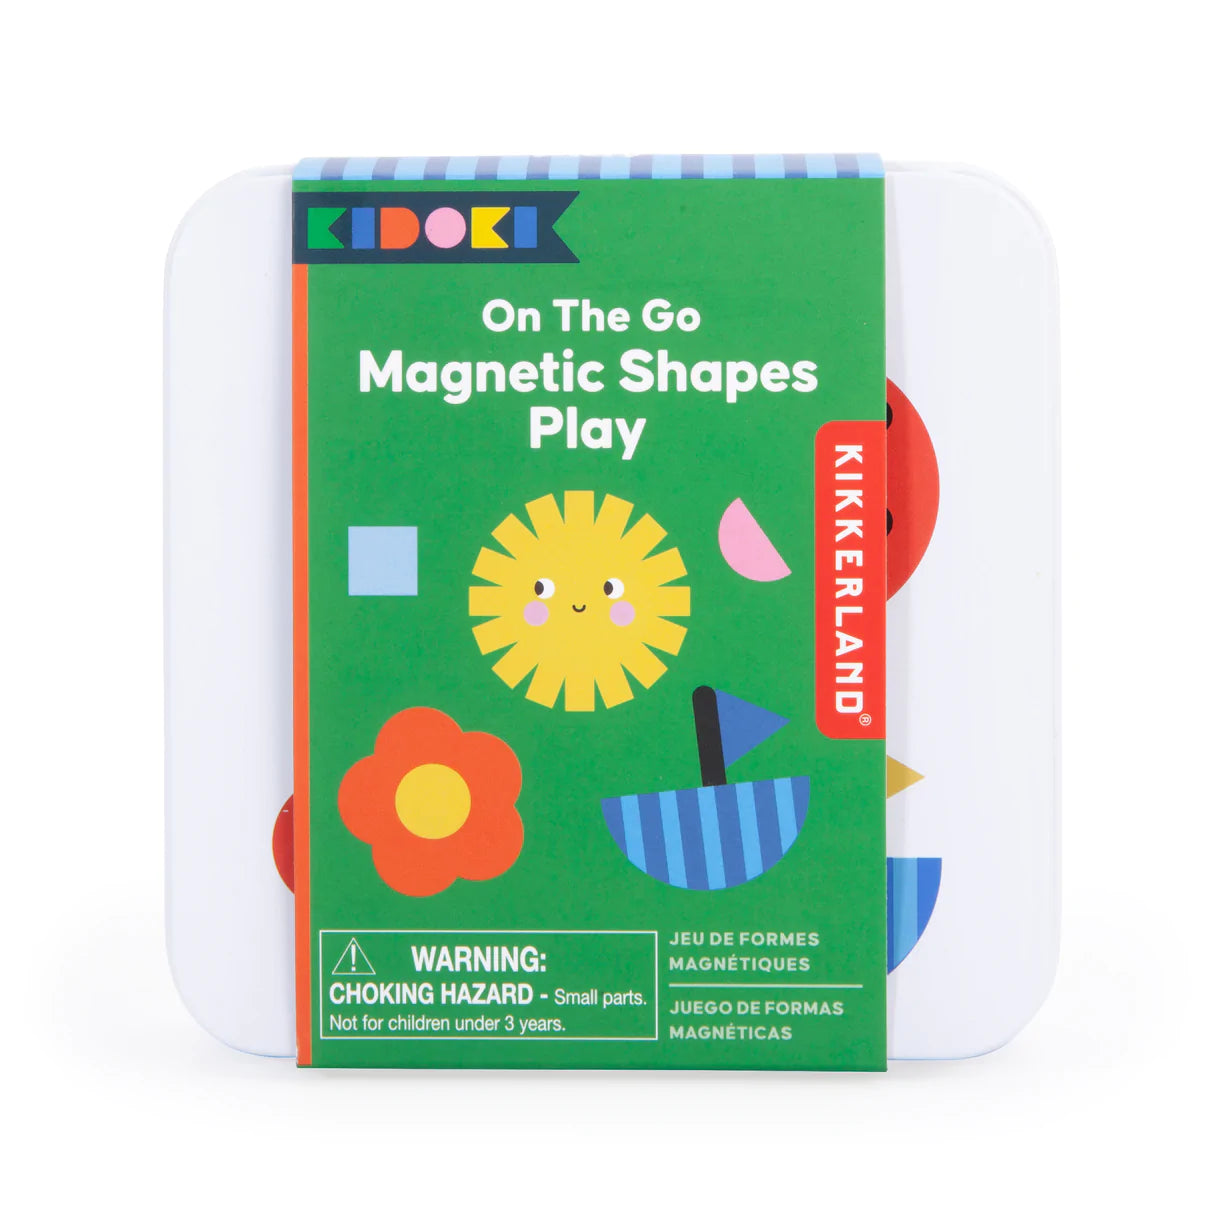 ON THE GO MAGNETIC SHAPES PLAY